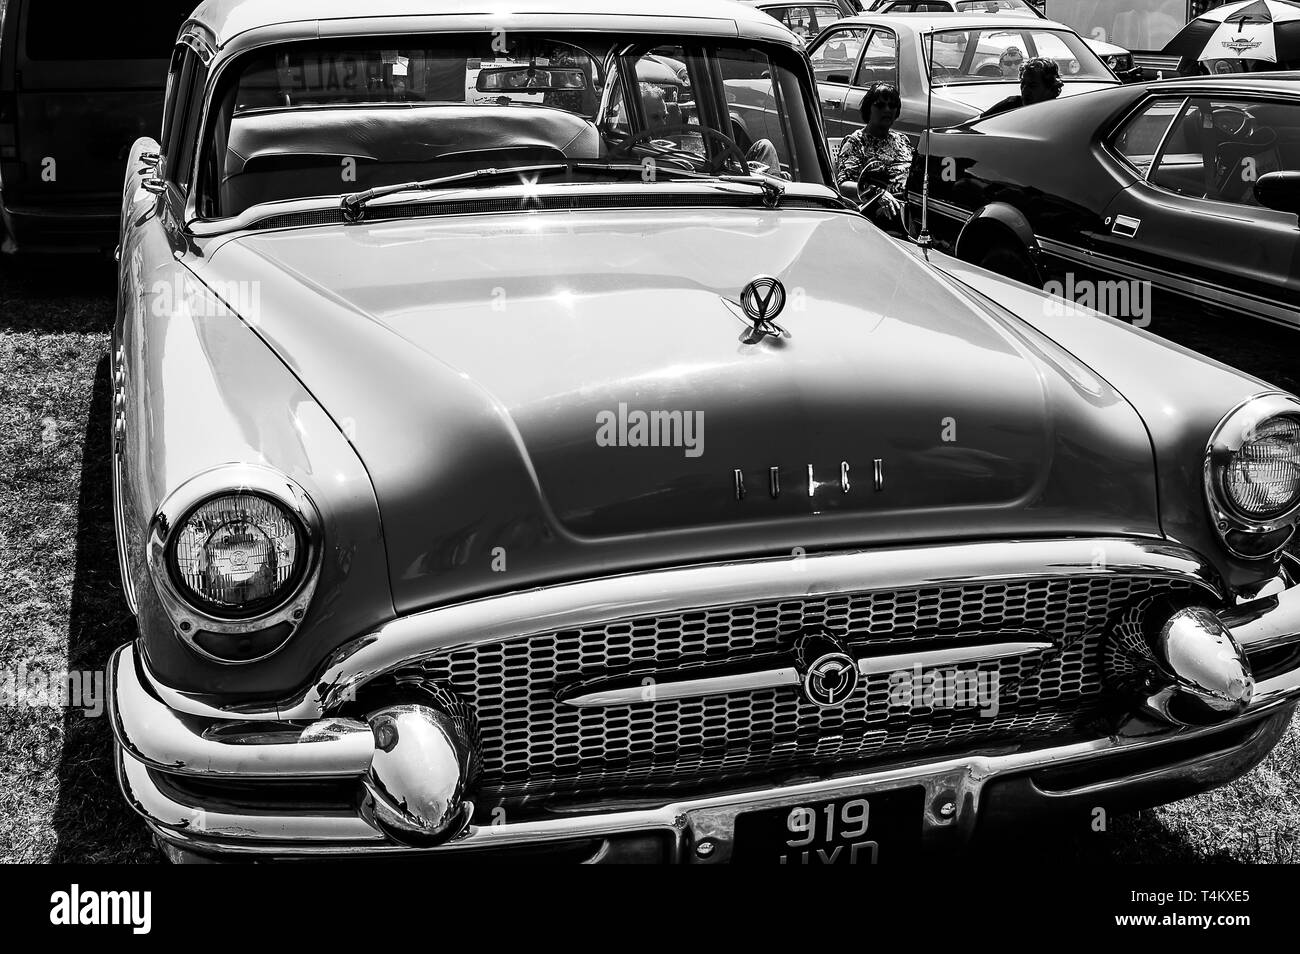 A 1955 Buik Roadmaster on display at a car show Stock Photo